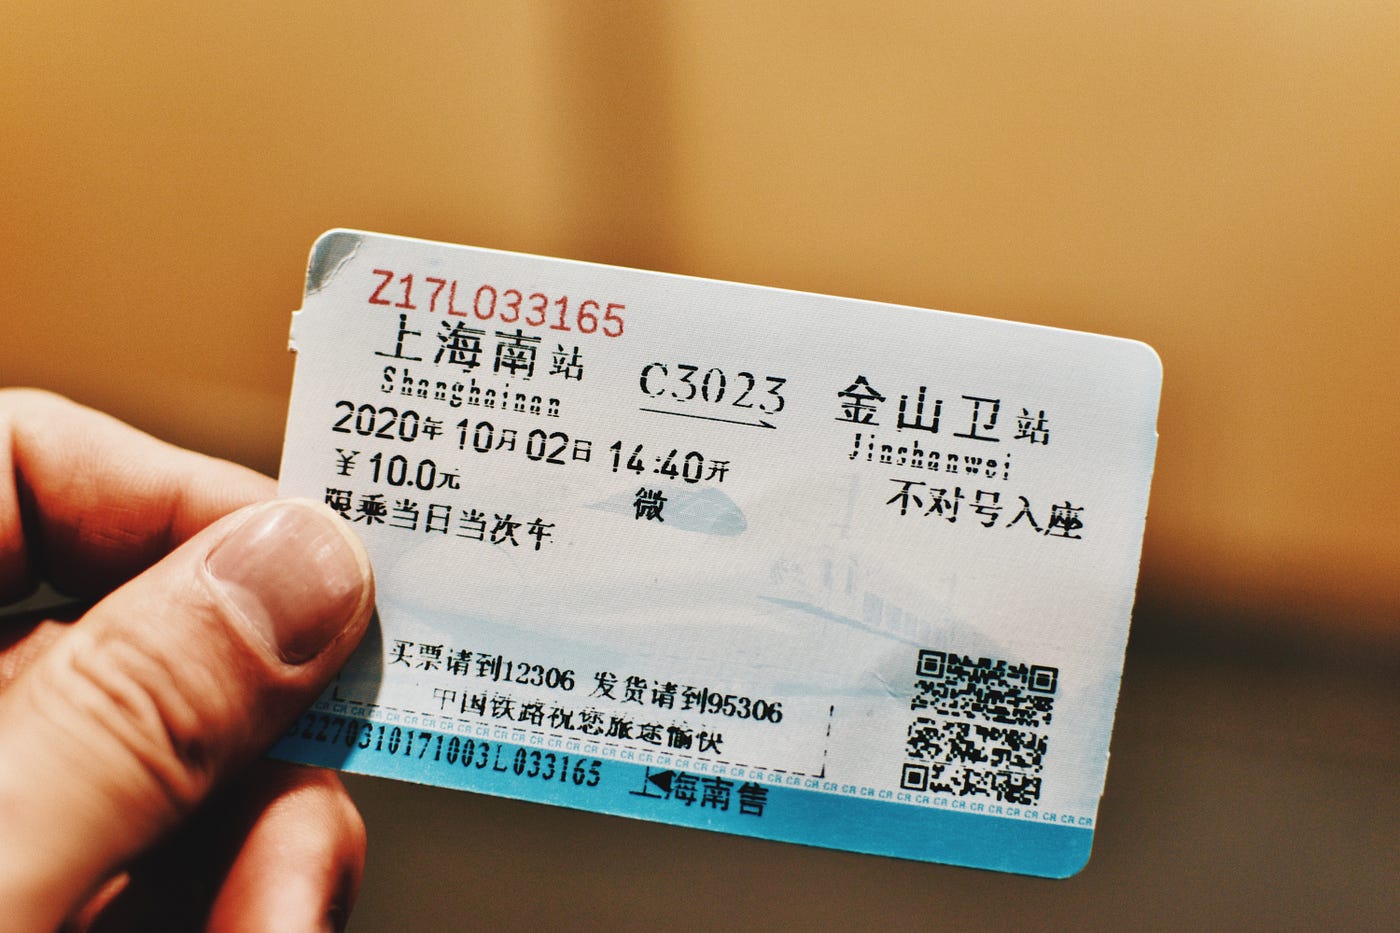 a hand holding a ticket with Chinese characters on it. https://www.newsbreak.com/publishers/@561573